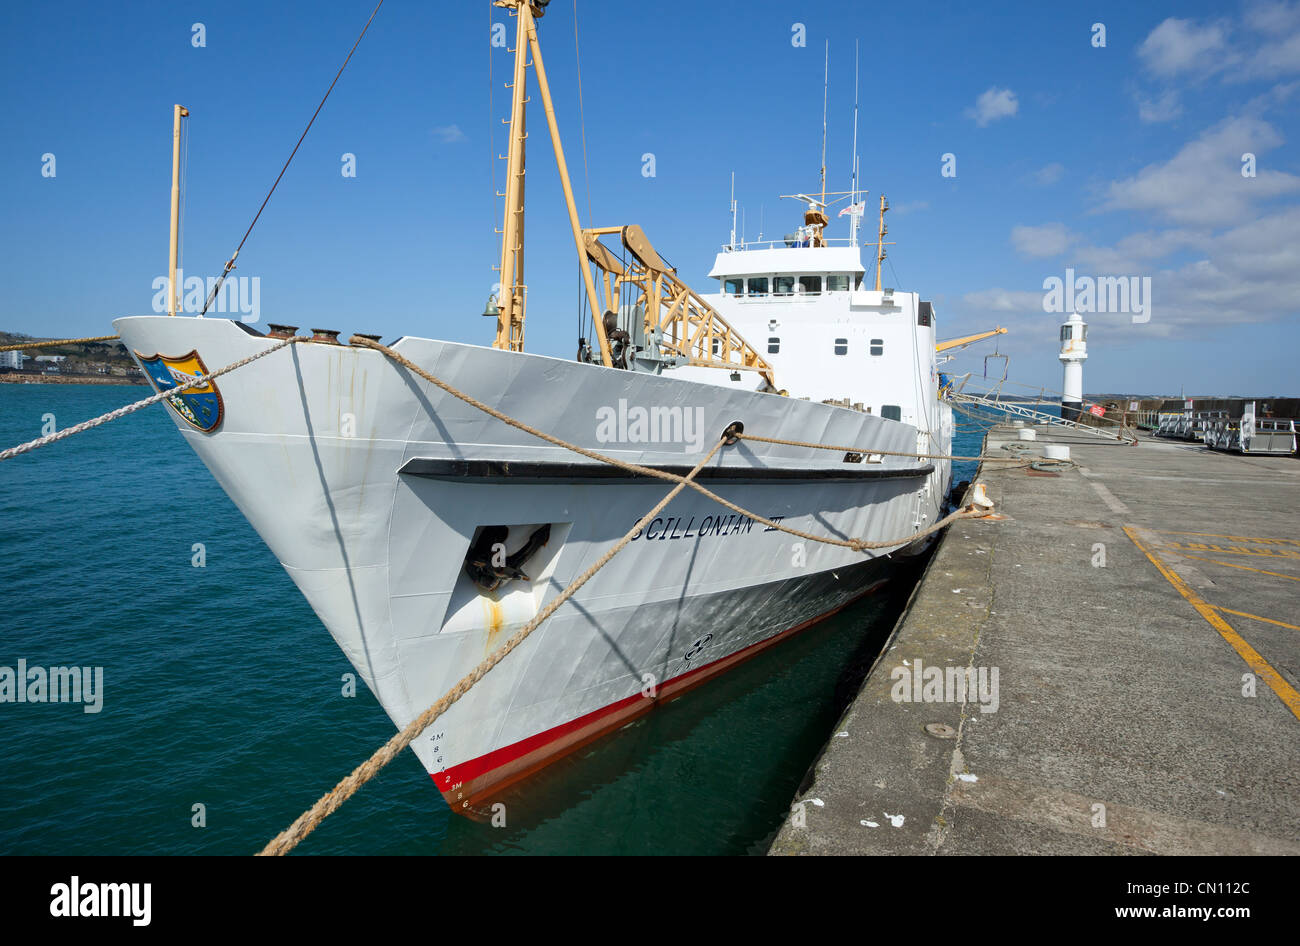 Scillonian III, the Isles of Scilly ferry, in Penzance harbour, Cornwall UK. Stock Photo